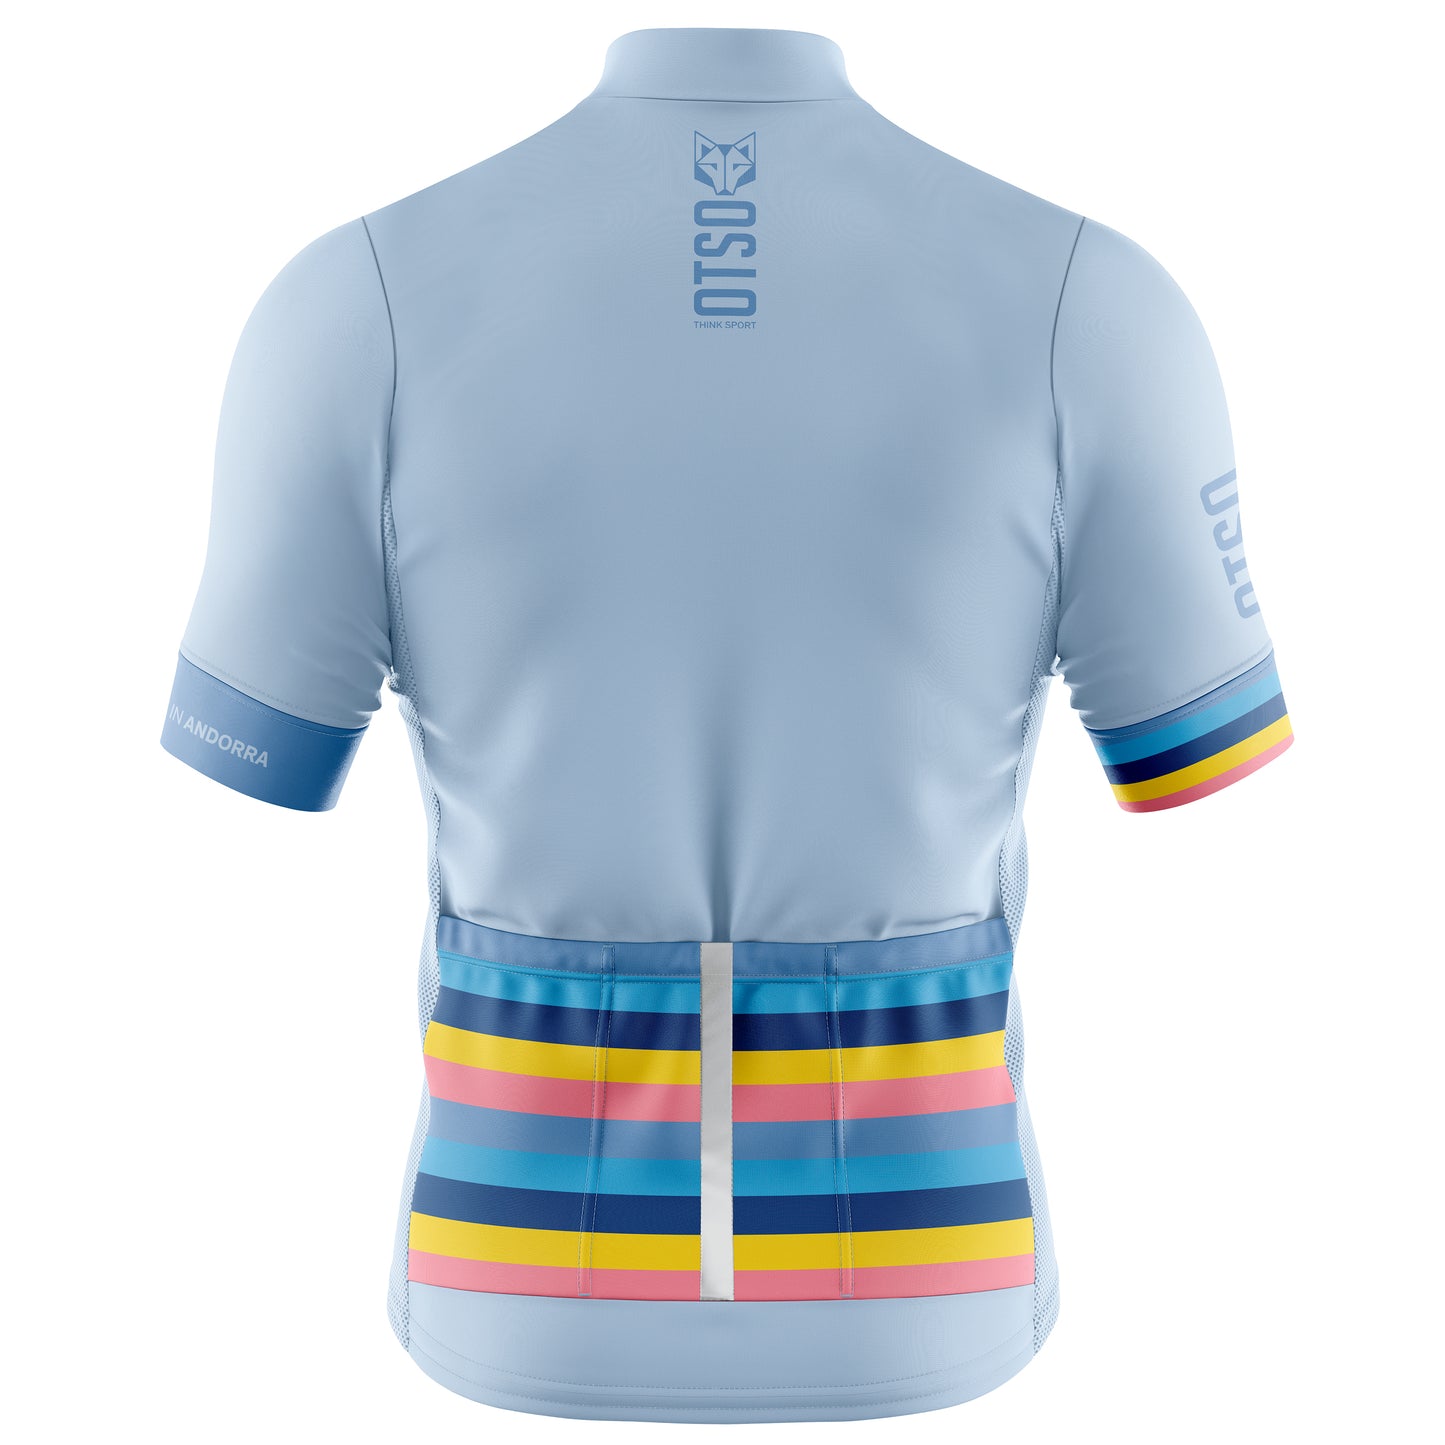 Maillot de ciclismo manga corta mujer - Stripes Turquoise (Outlet)